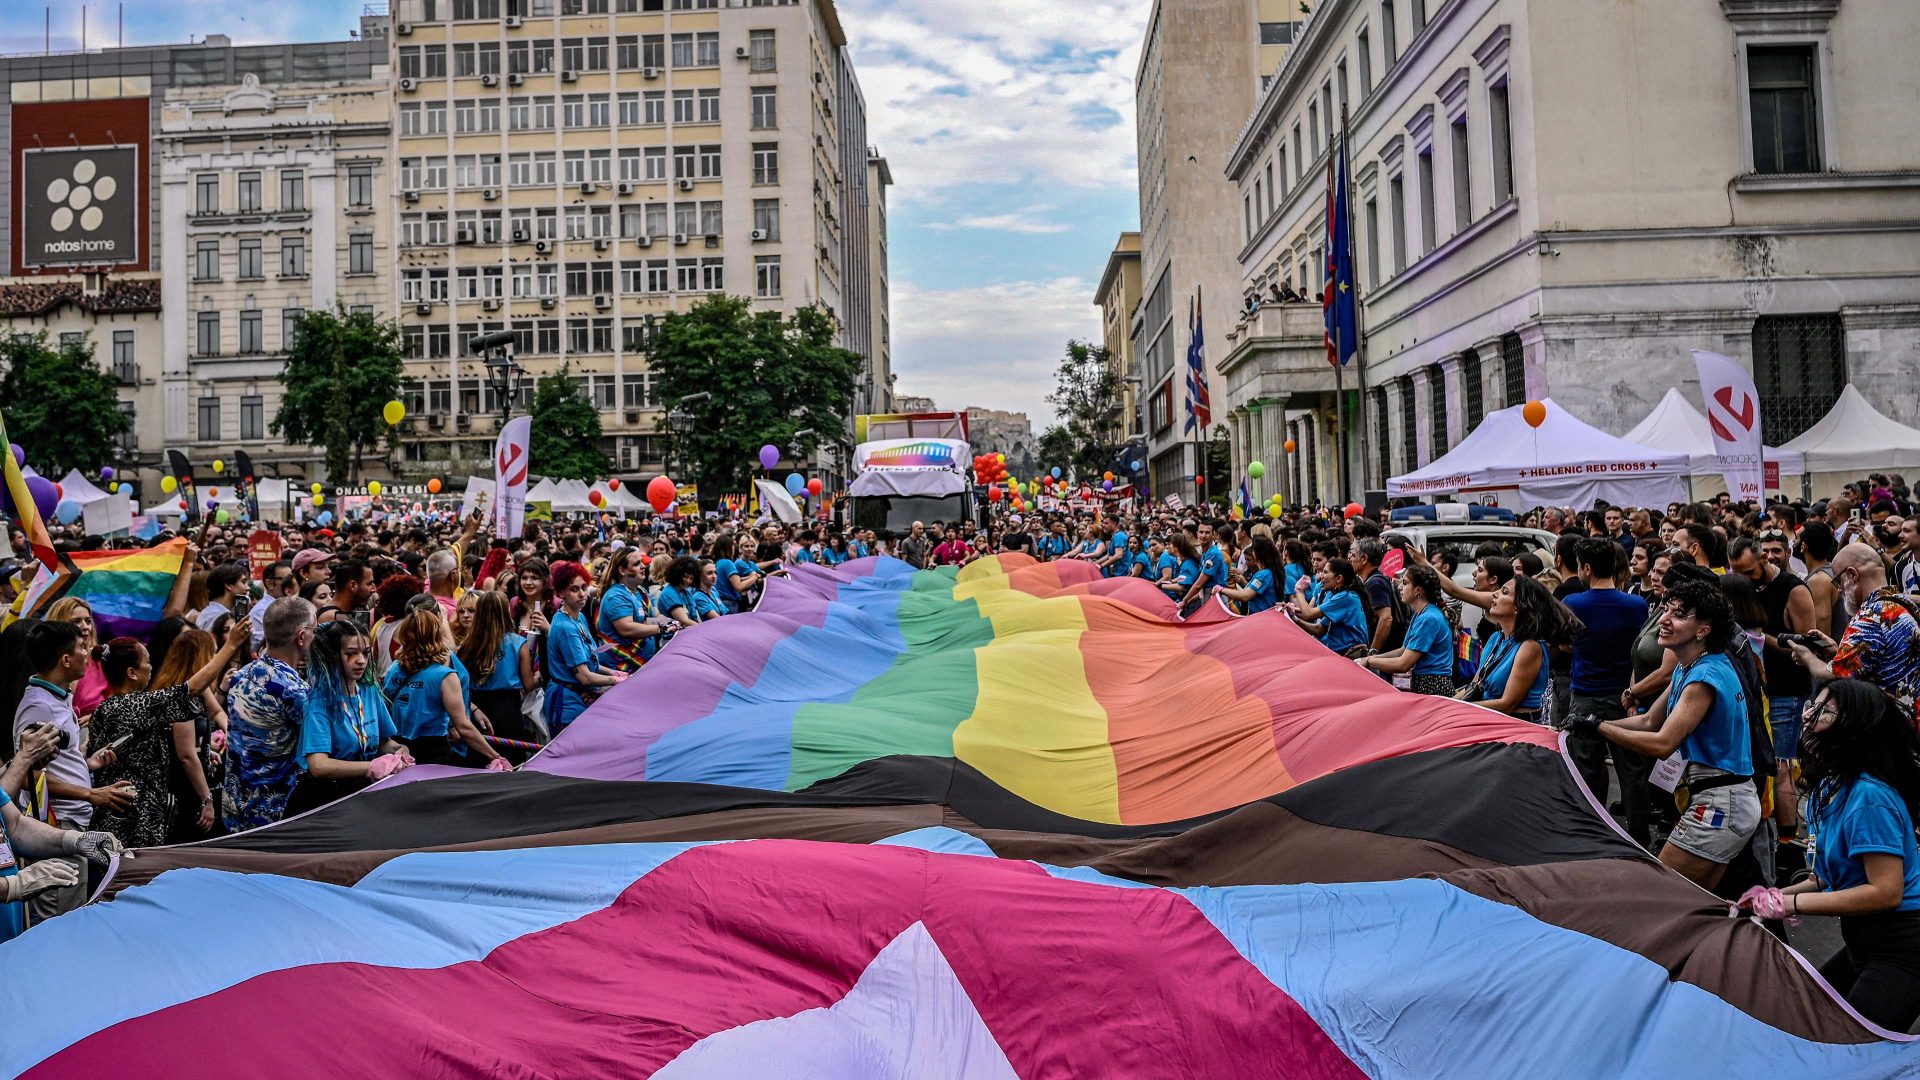 Participants hold a giant rainbow flag during the Athens Pride parade in Athens. Photo: Spyros BAKALIS / AFP